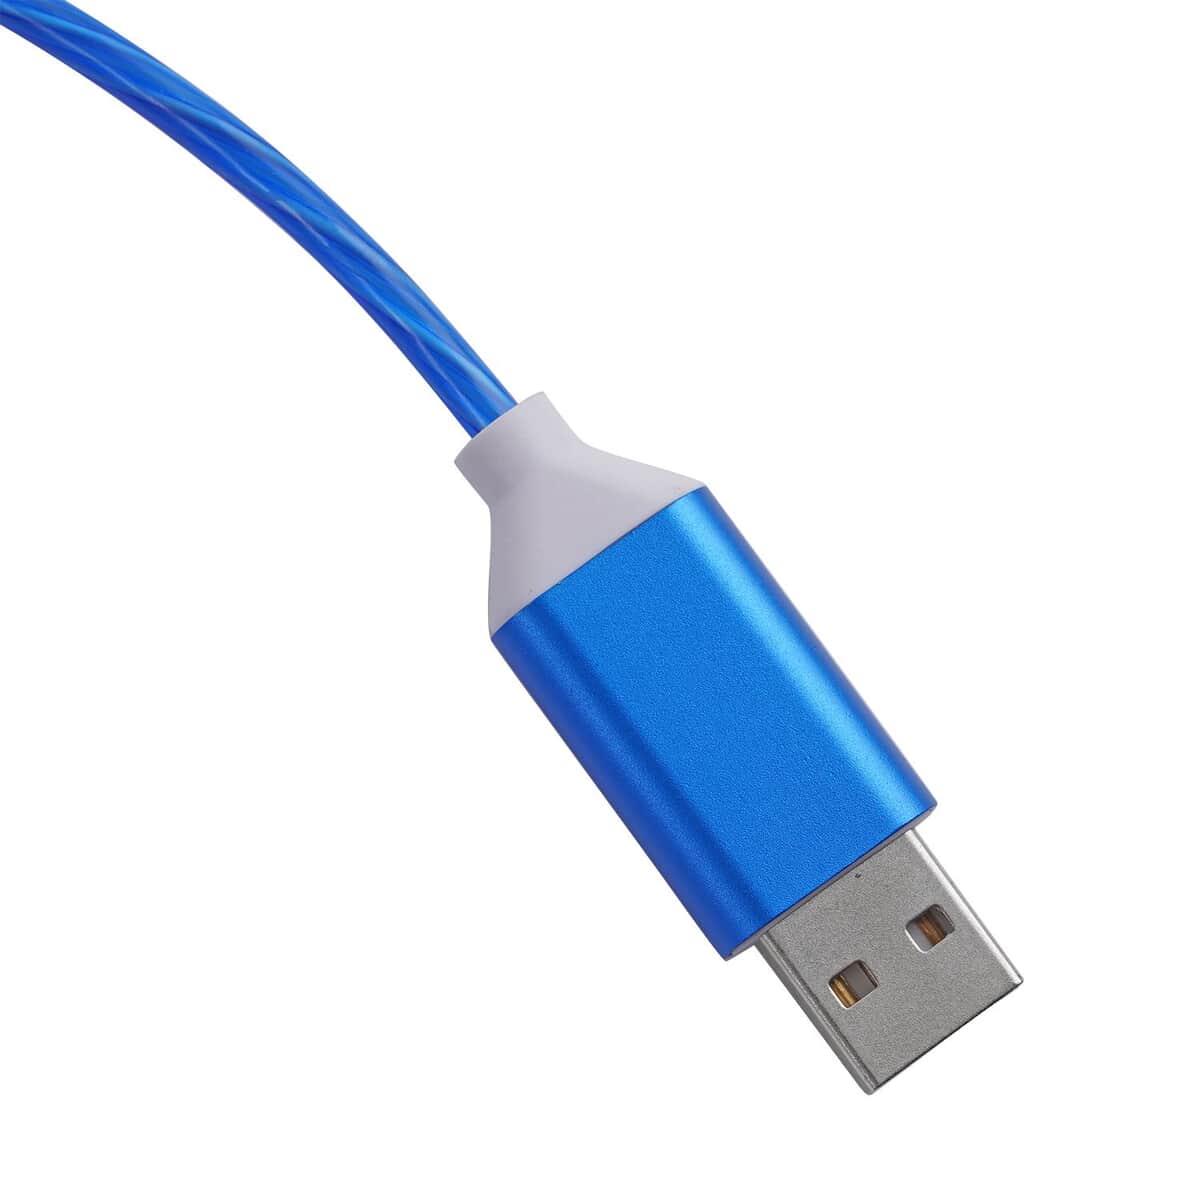 2pcs Set 3 in 1 Light Moving Charging Cable - Blue (47.24") image number 4